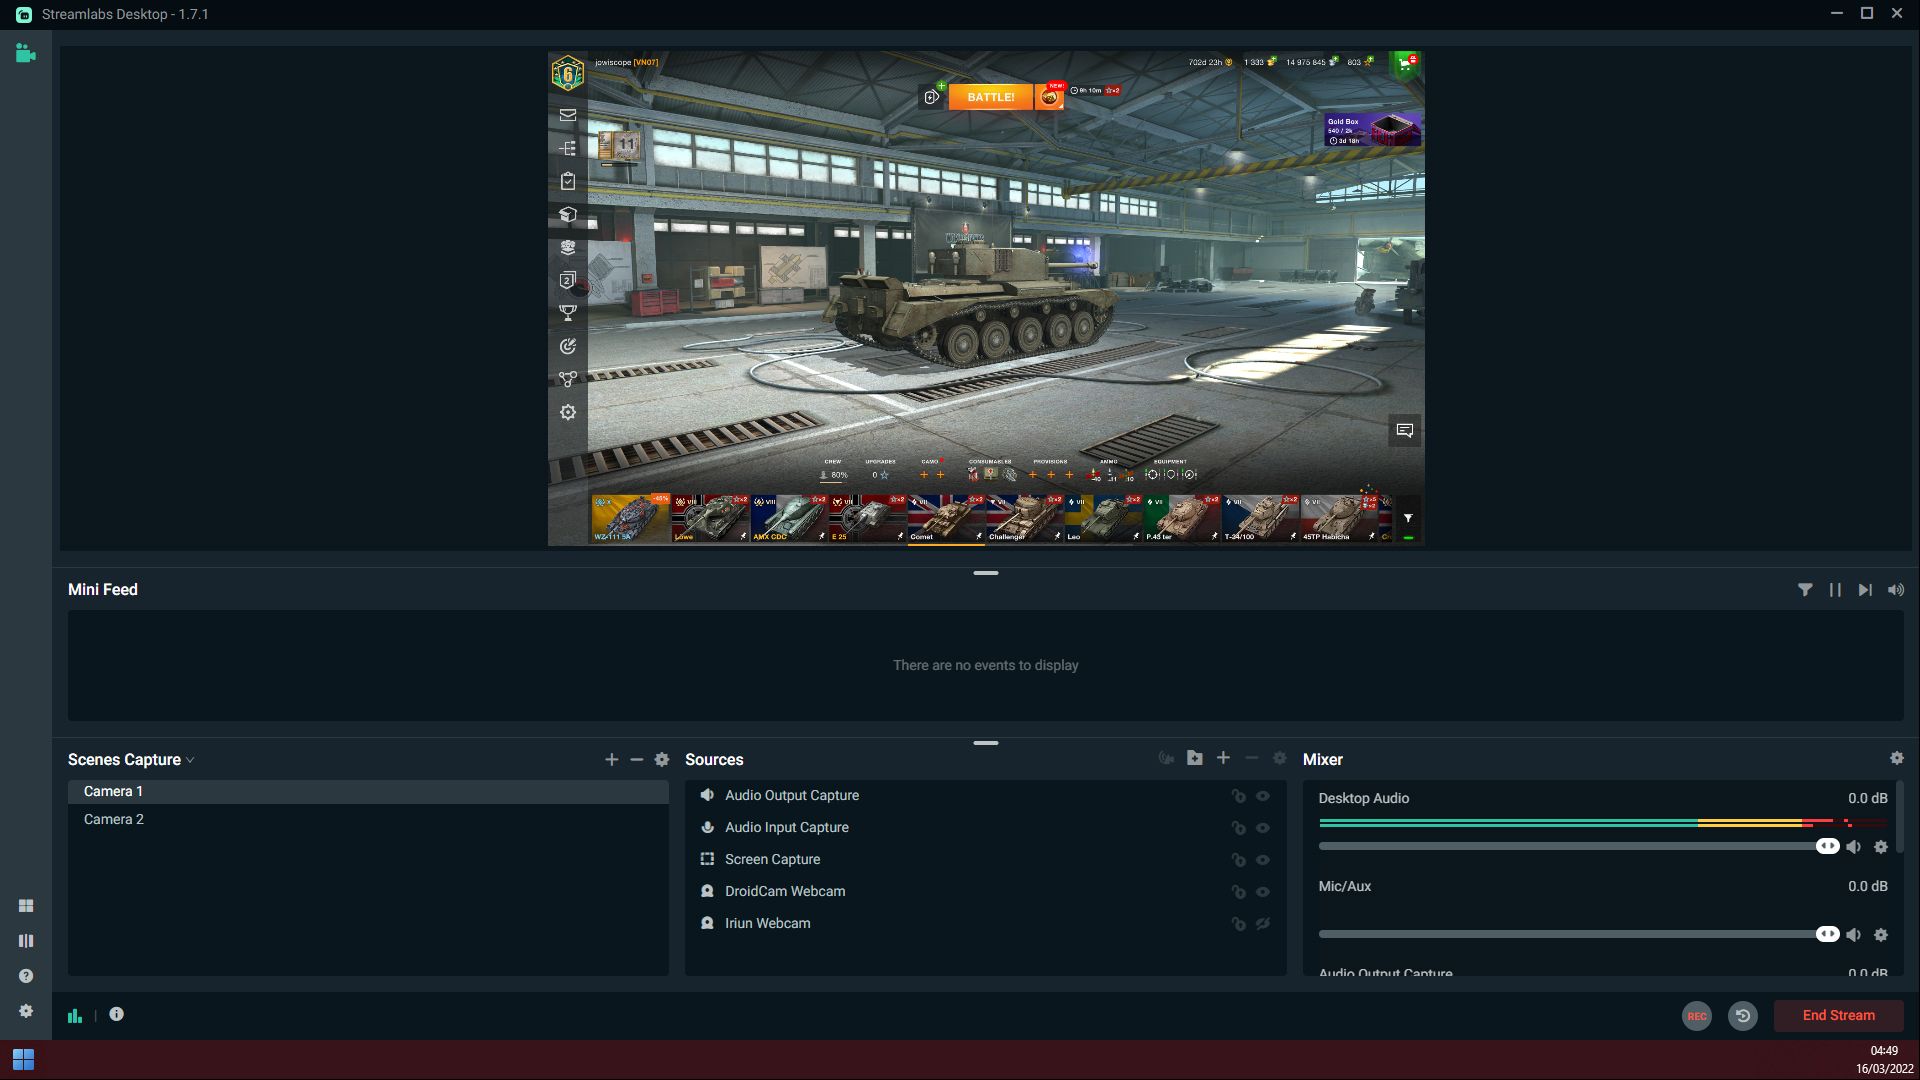 Setting Up Streamlabs With World of Tanks